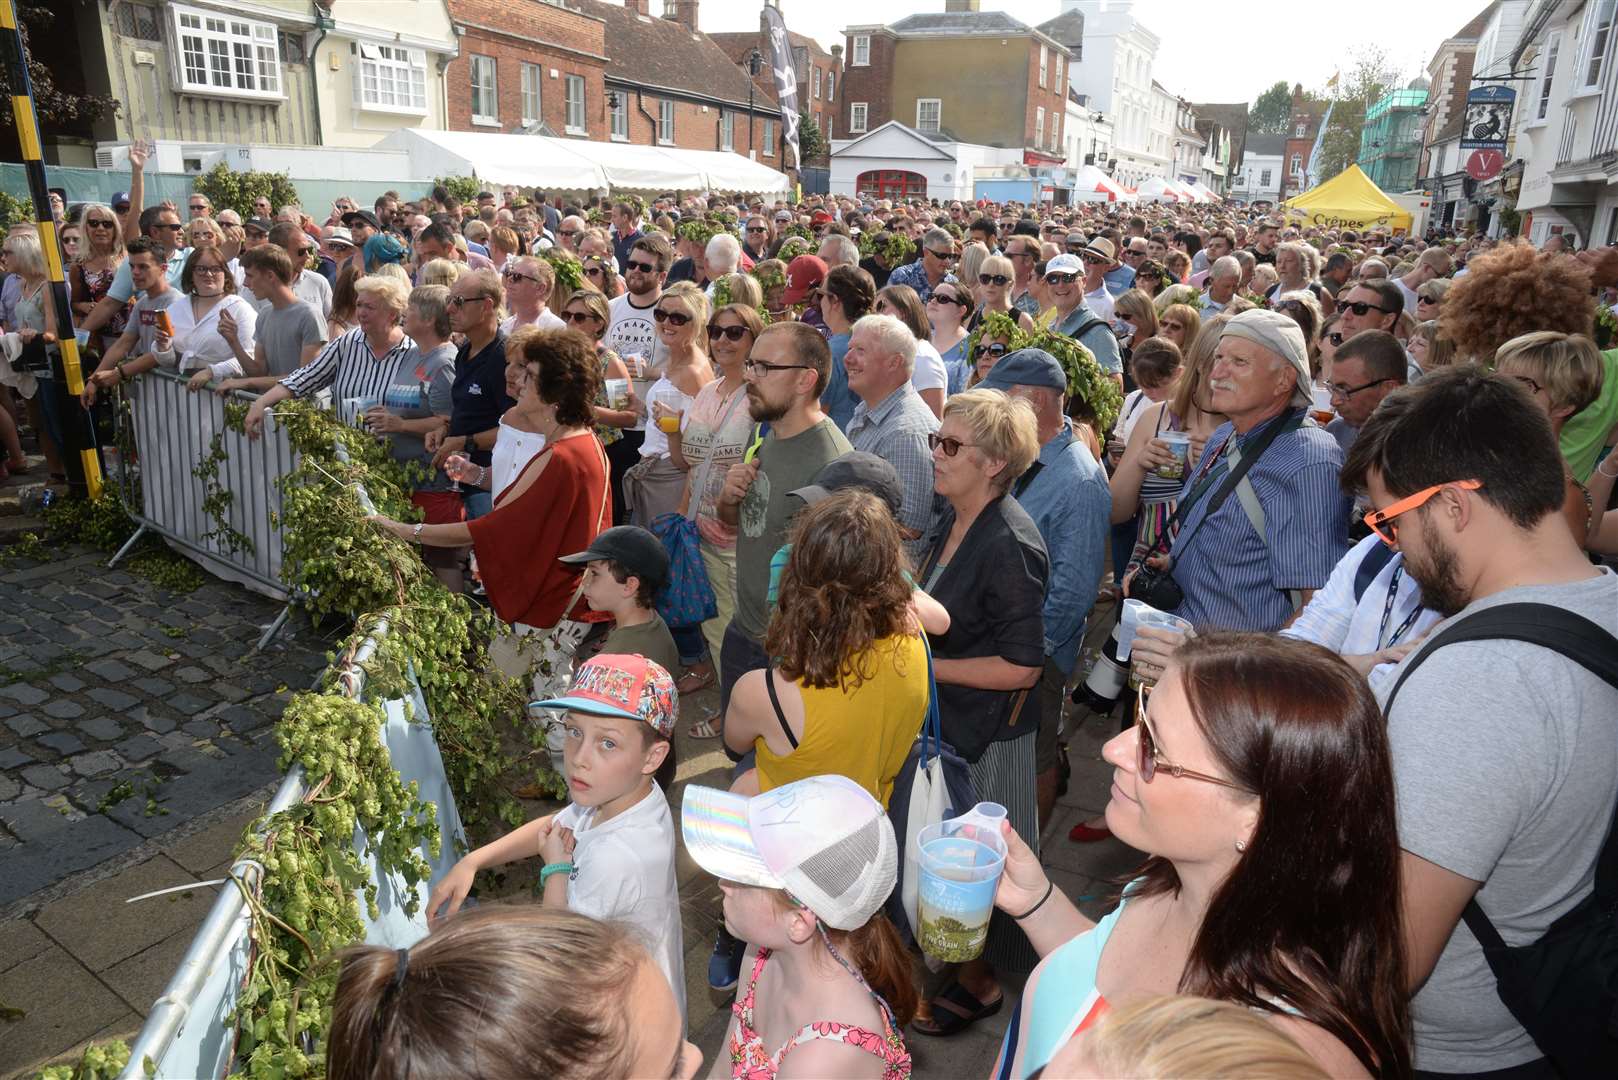 The audience for Loose Change performing during Faversham Hop Festival 2019